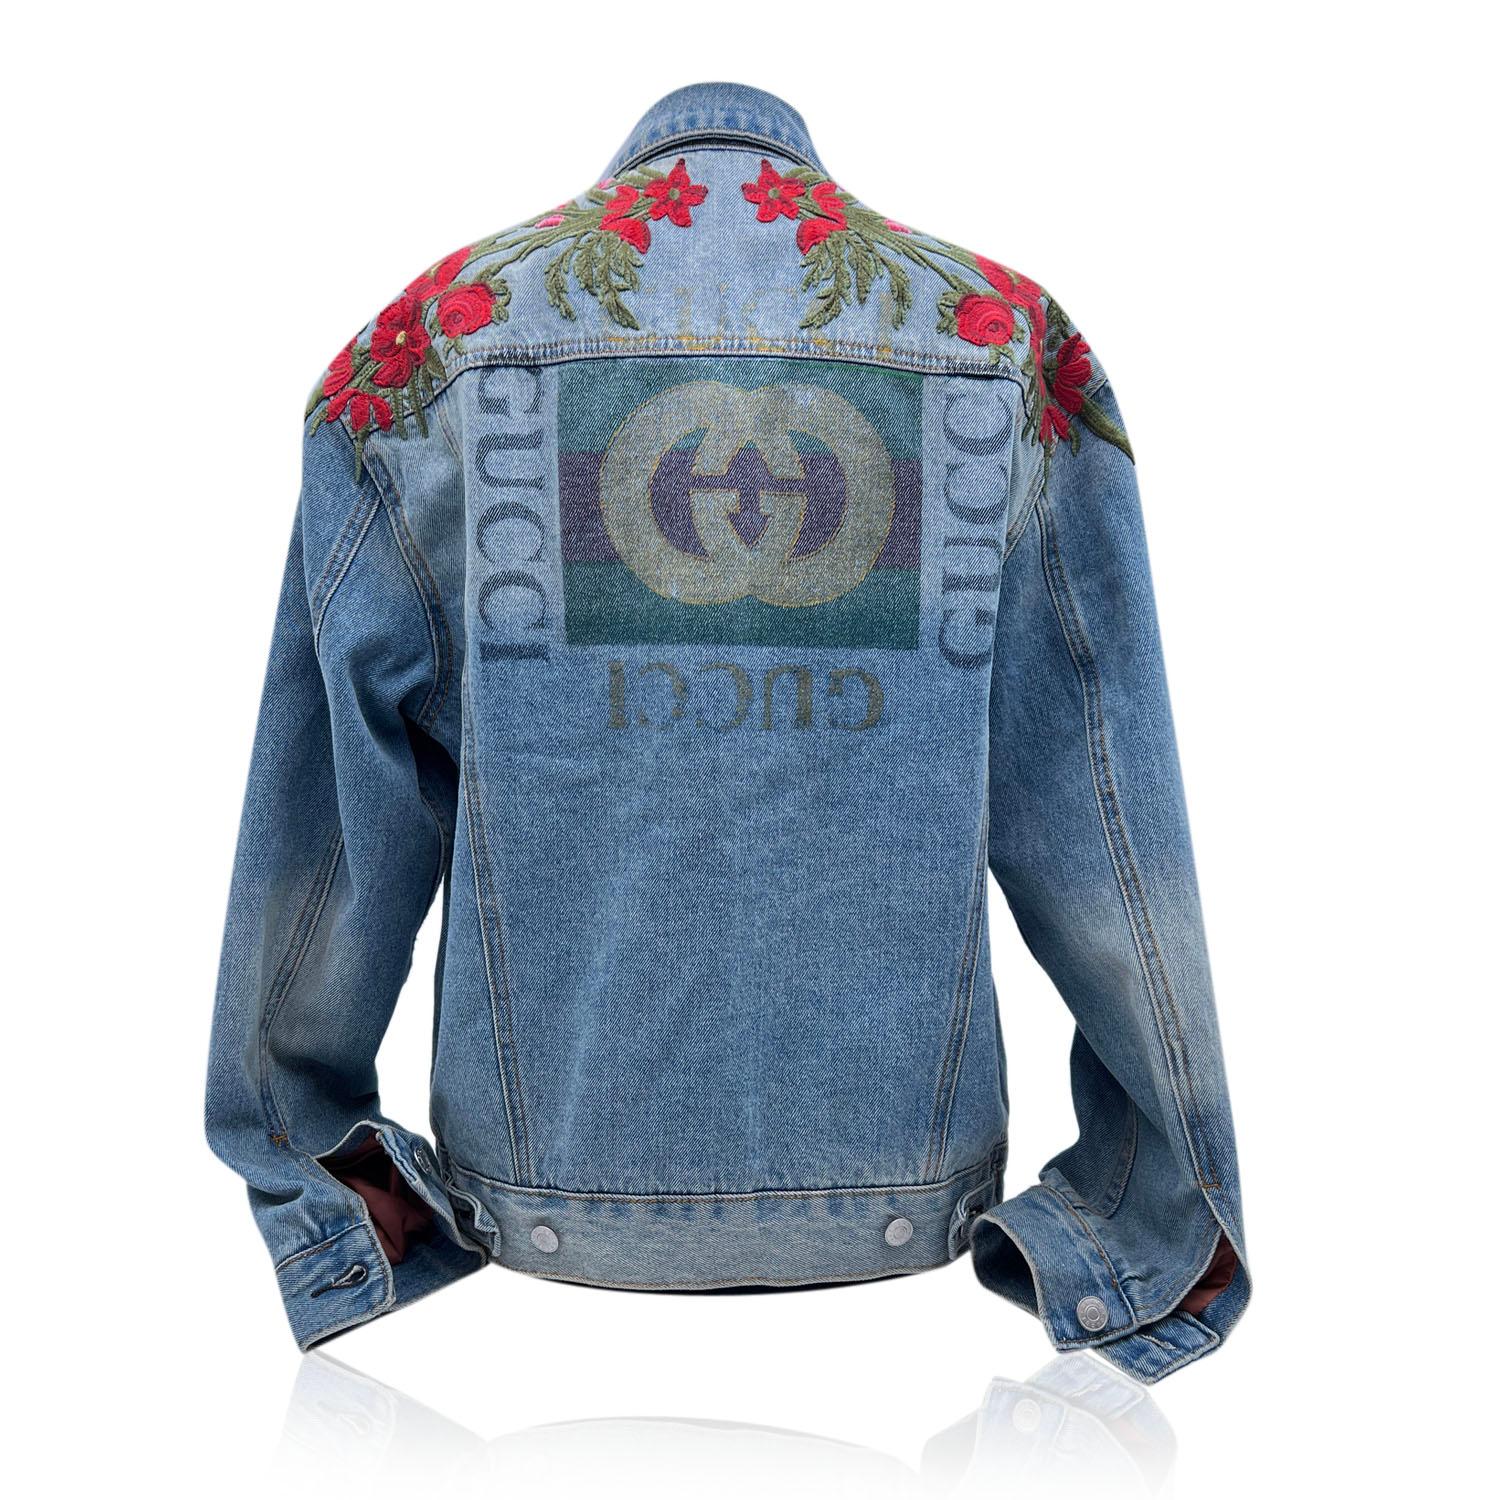 Gucci 'Modern' Denim Jeans from Gucci: light blue cotton denim jacket featuring 'Modern' writing on the front, embroidered red flowers on the shoulders and GG logo printed on the back. 2 side pockets on the waist and two chest pockets. Composition: